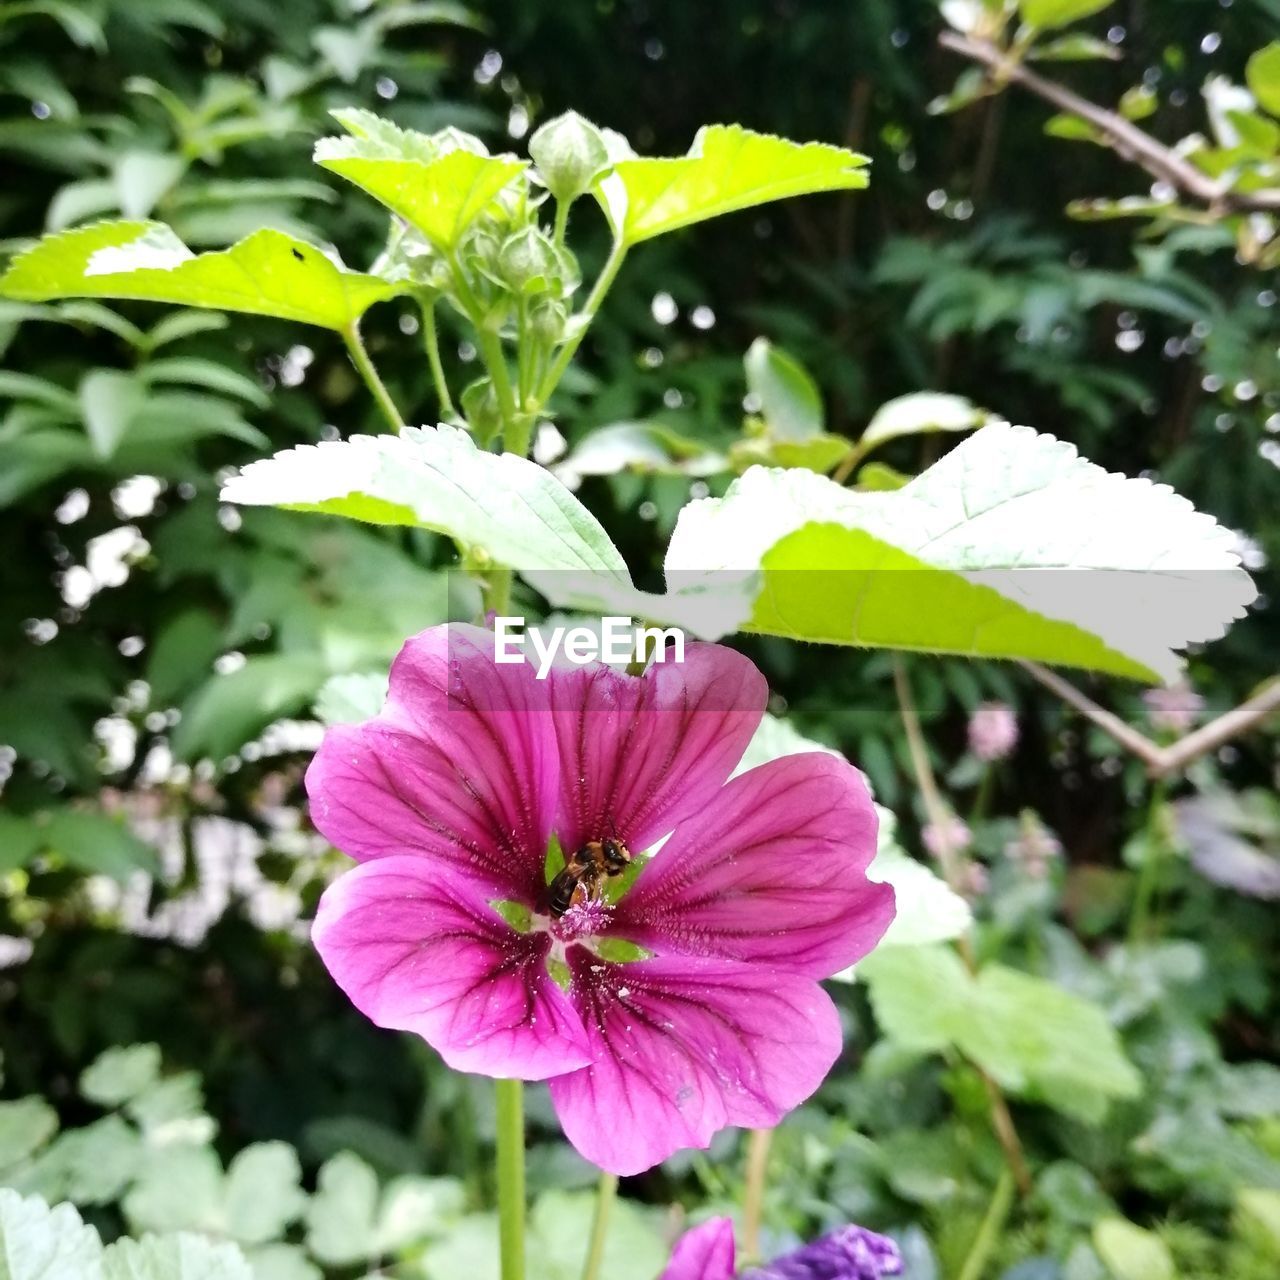 flower, flowering plant, plant, freshness, beauty in nature, petal, growth, fragility, flower head, inflorescence, close-up, nature, pink, plant part, wildflower, leaf, no people, focus on foreground, day, outdoors, green, pollen, botany, springtime, purple, blossom